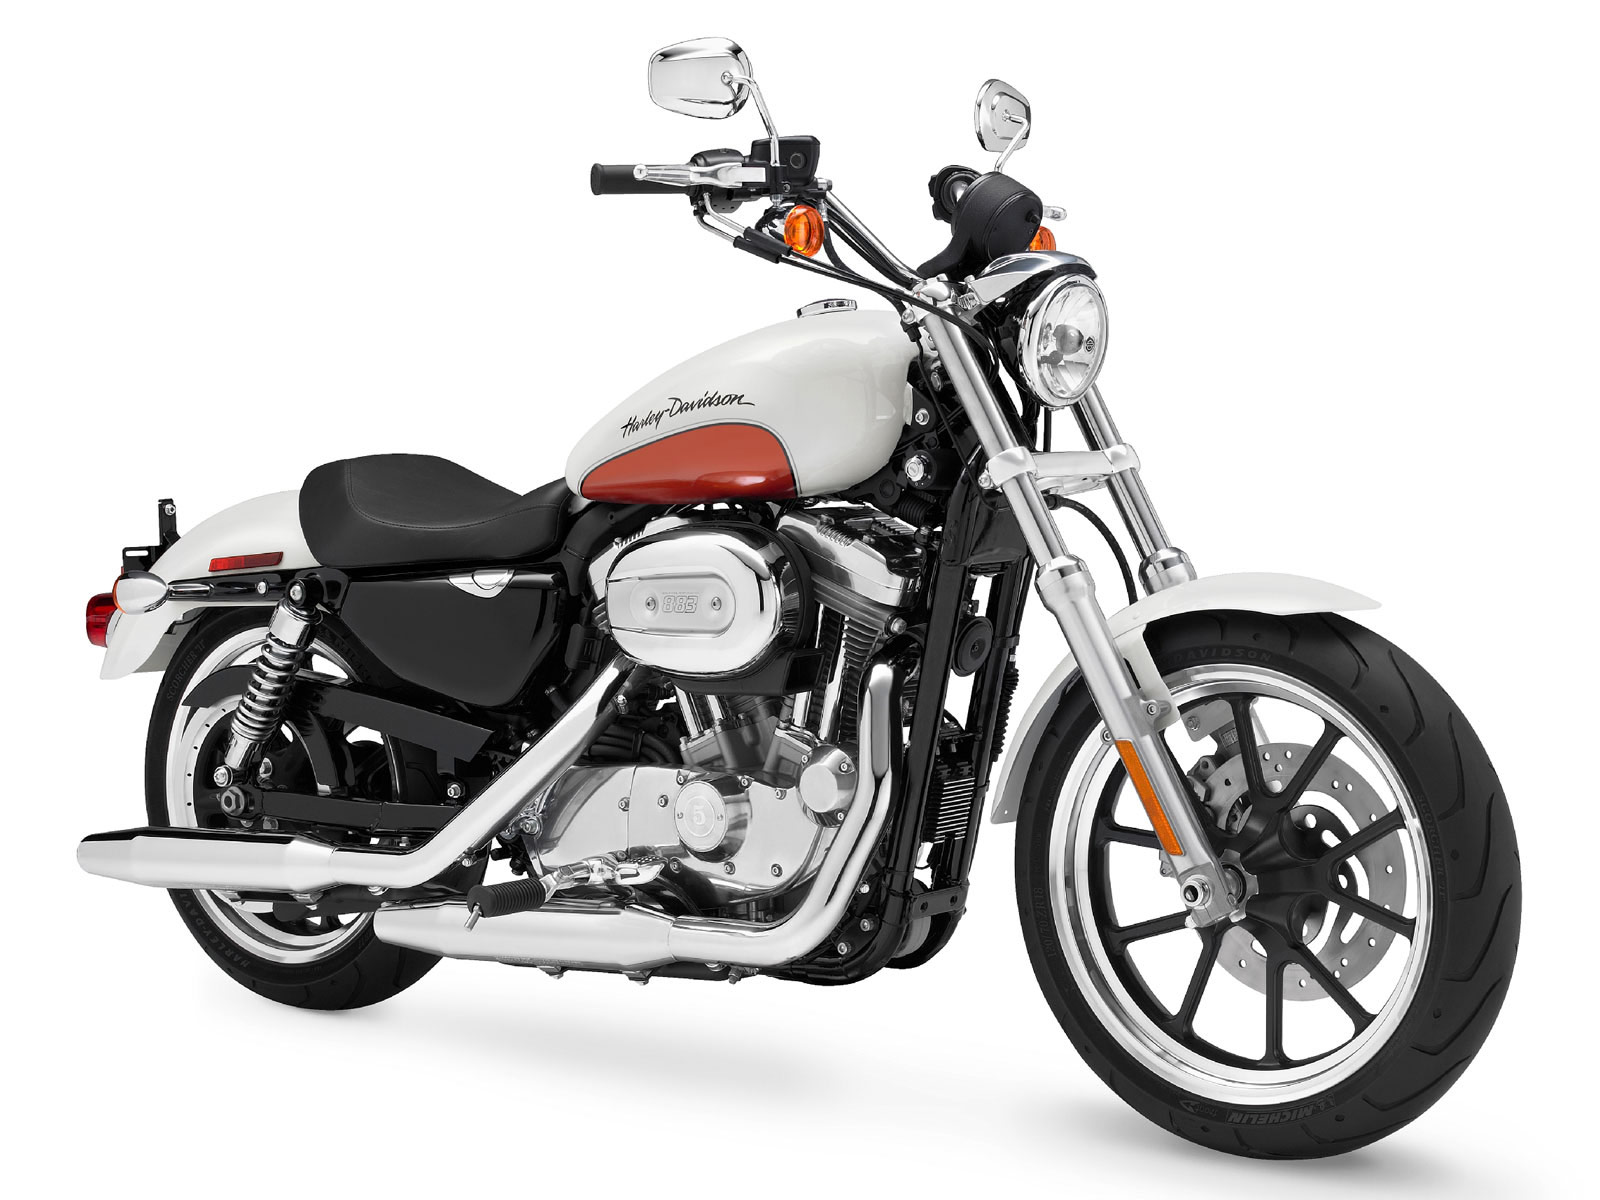 Harley davidson low rider review - Motorcycle Pictures